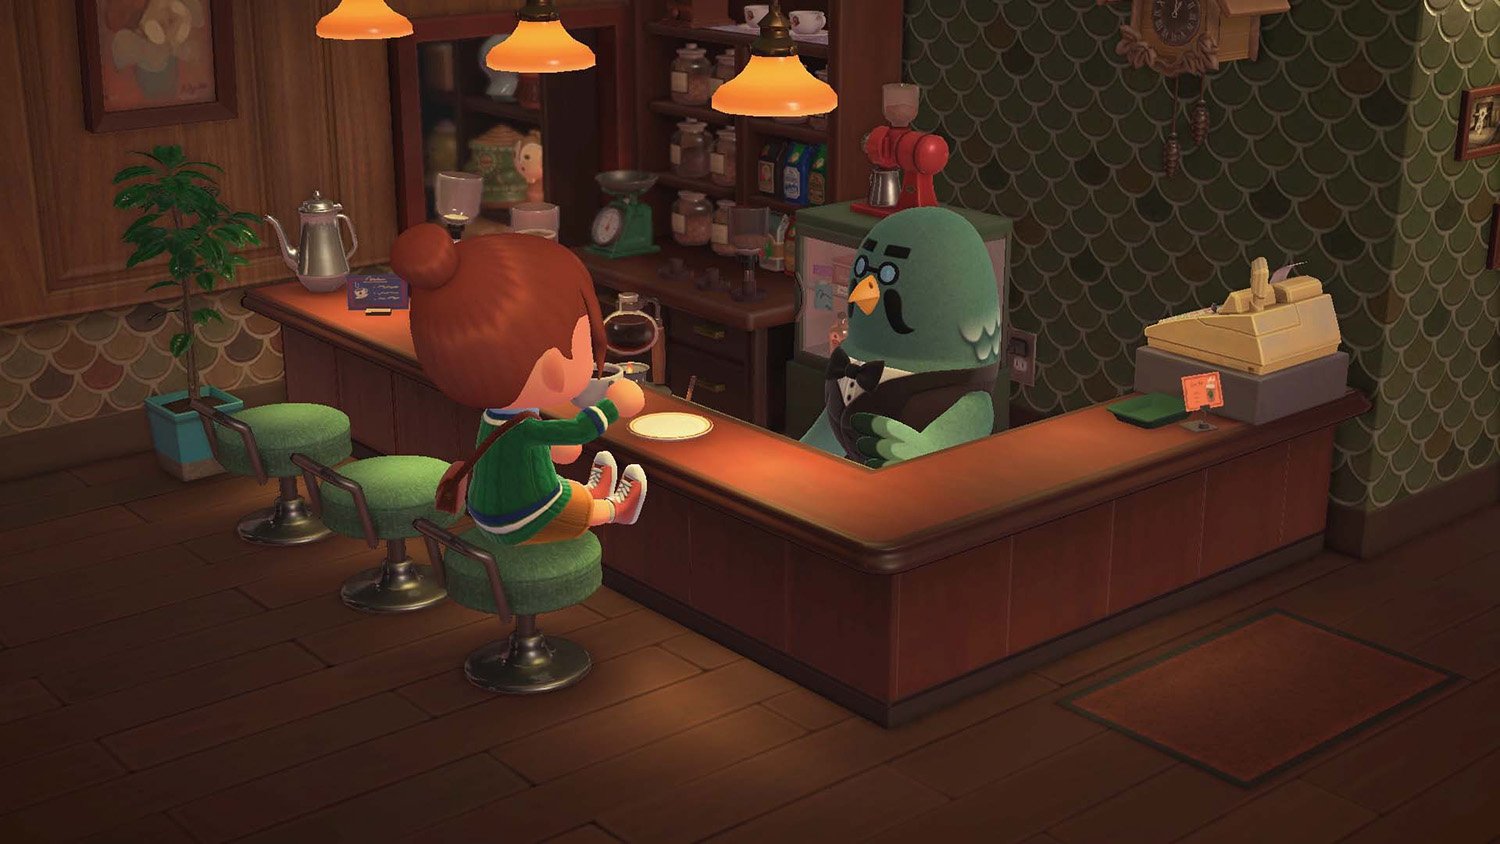 Brewster serves coffee to a villager in Animal Crossing: New Horizons